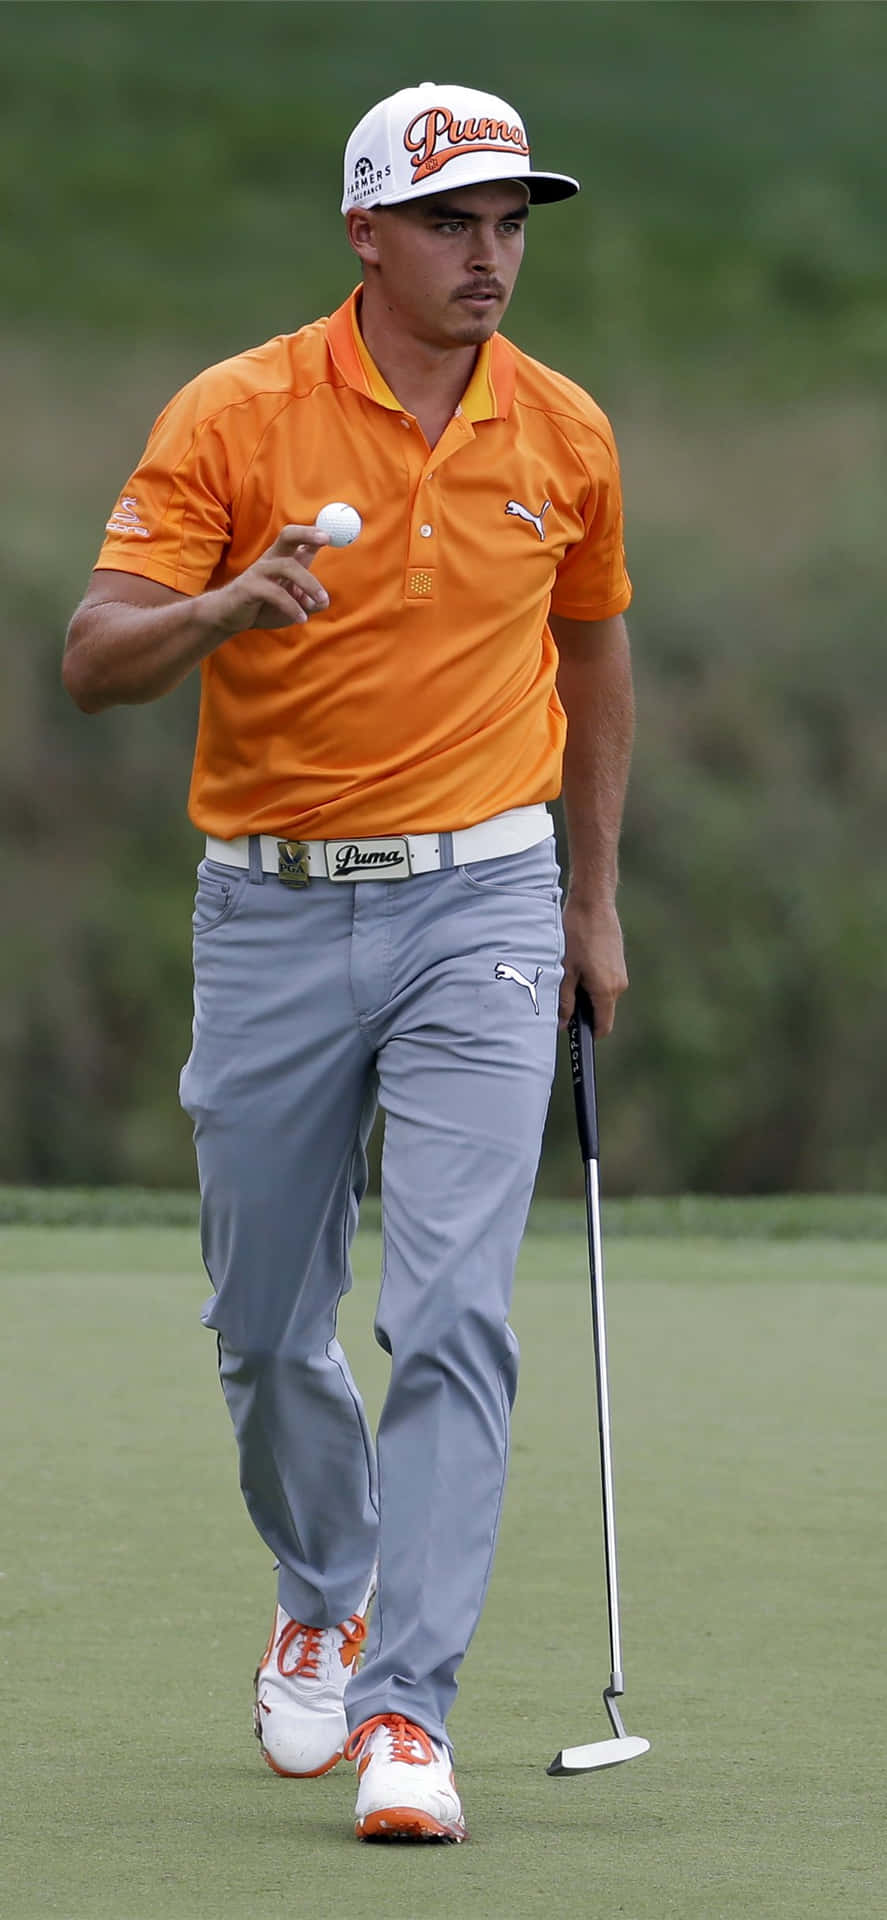 Iphone Xs Golf Background With Rickie Fowler Background